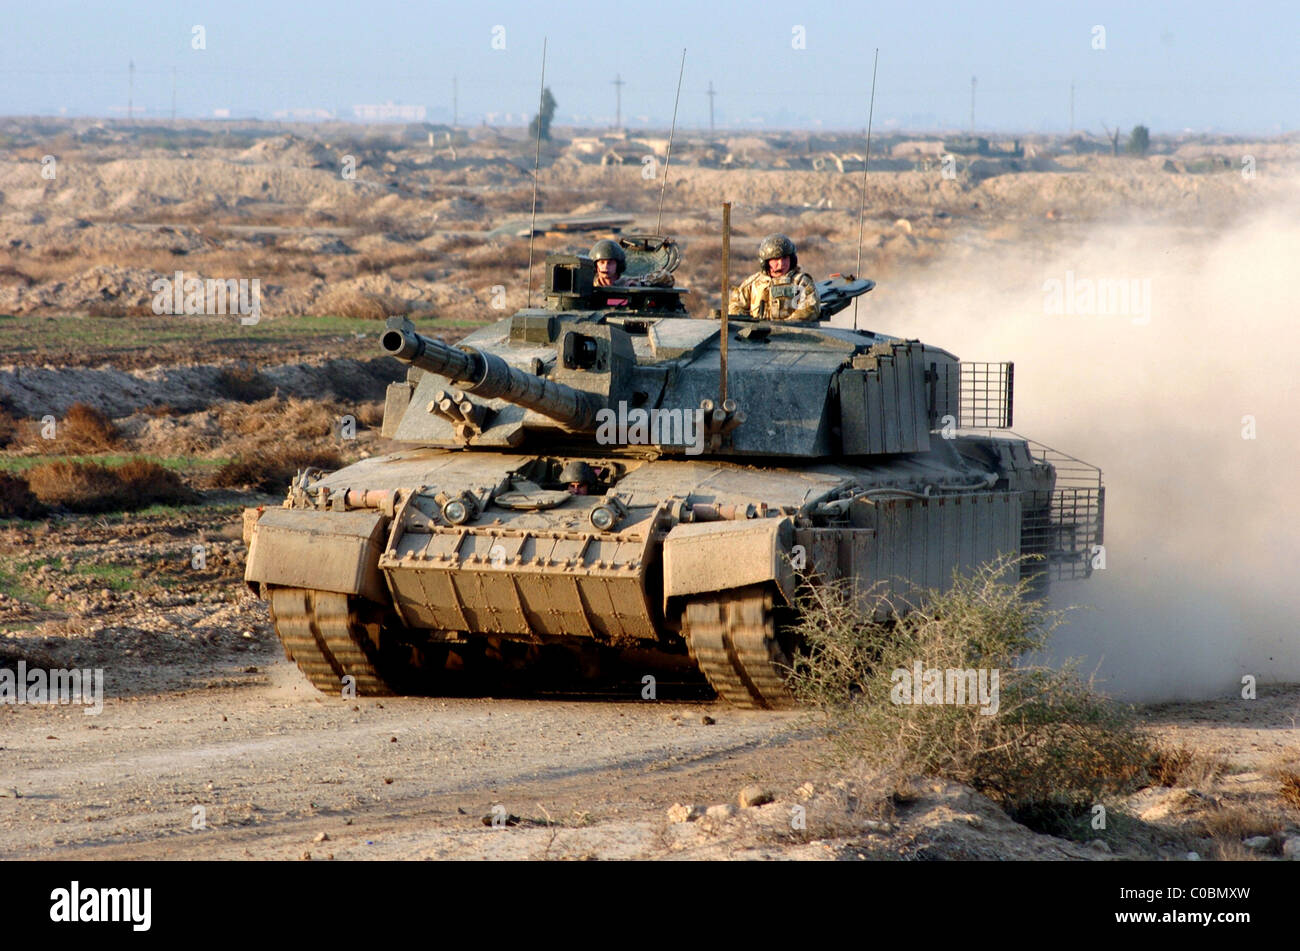 Benign Måned Lave om Iran Iraq War Tank High Resolution Stock Photography and Images - Alamy